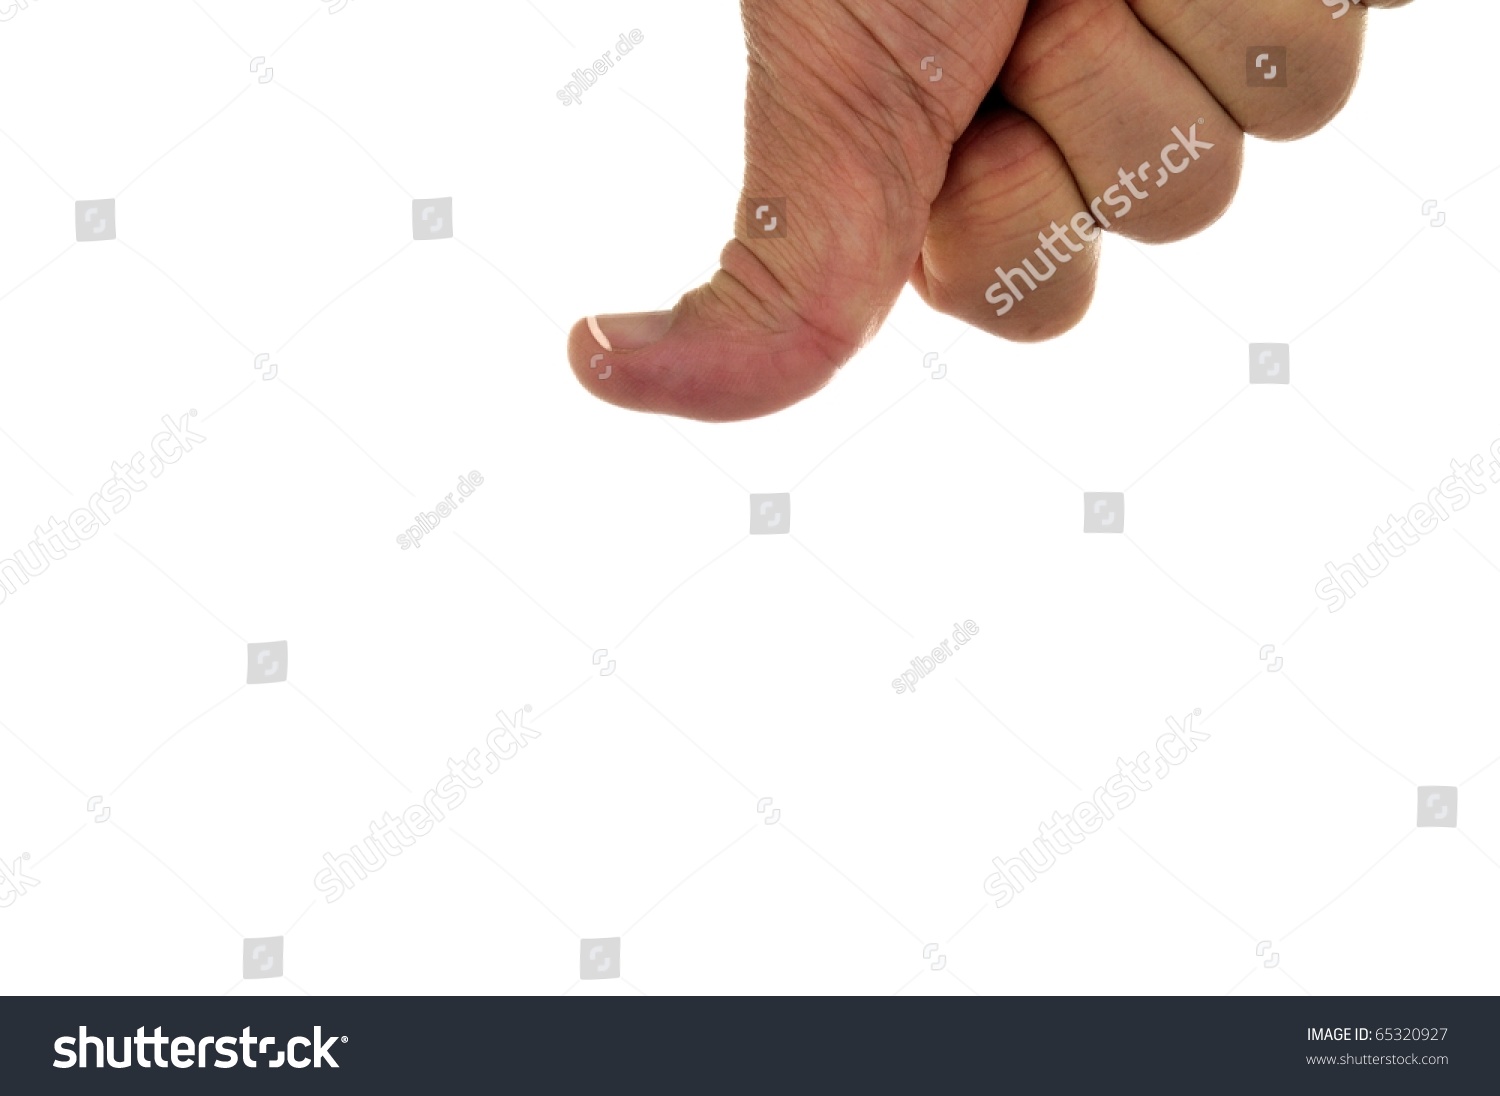 Bent Thumb Pressing Down - Isolated Over White Stock Photo 65320927 ...